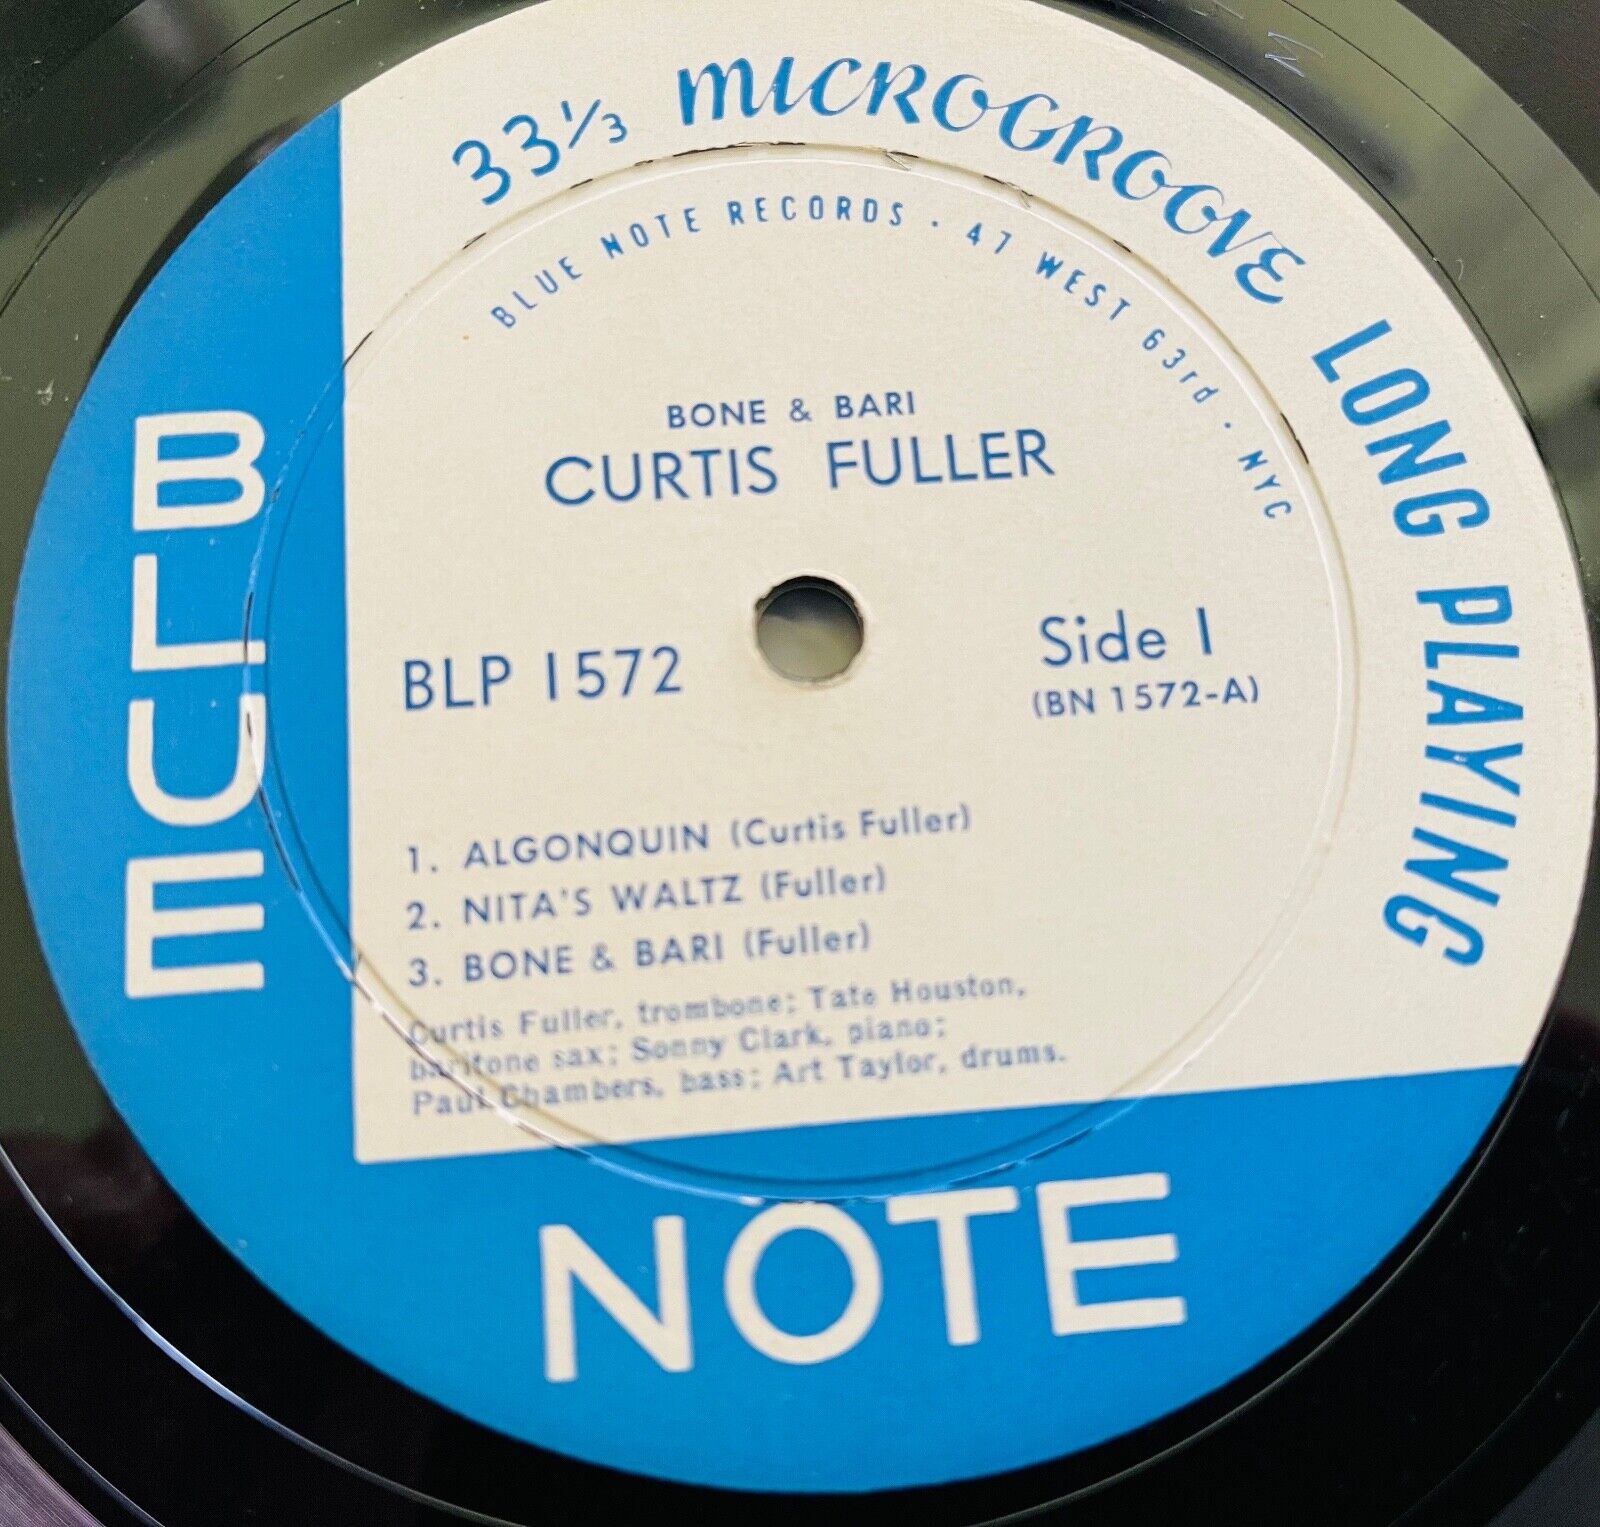 Pic 3 CURTIS FULLER - BONE & BARI - BLUE NOTE -FIRST MONO EDITION -LOOKS NEAR UNPLAYED